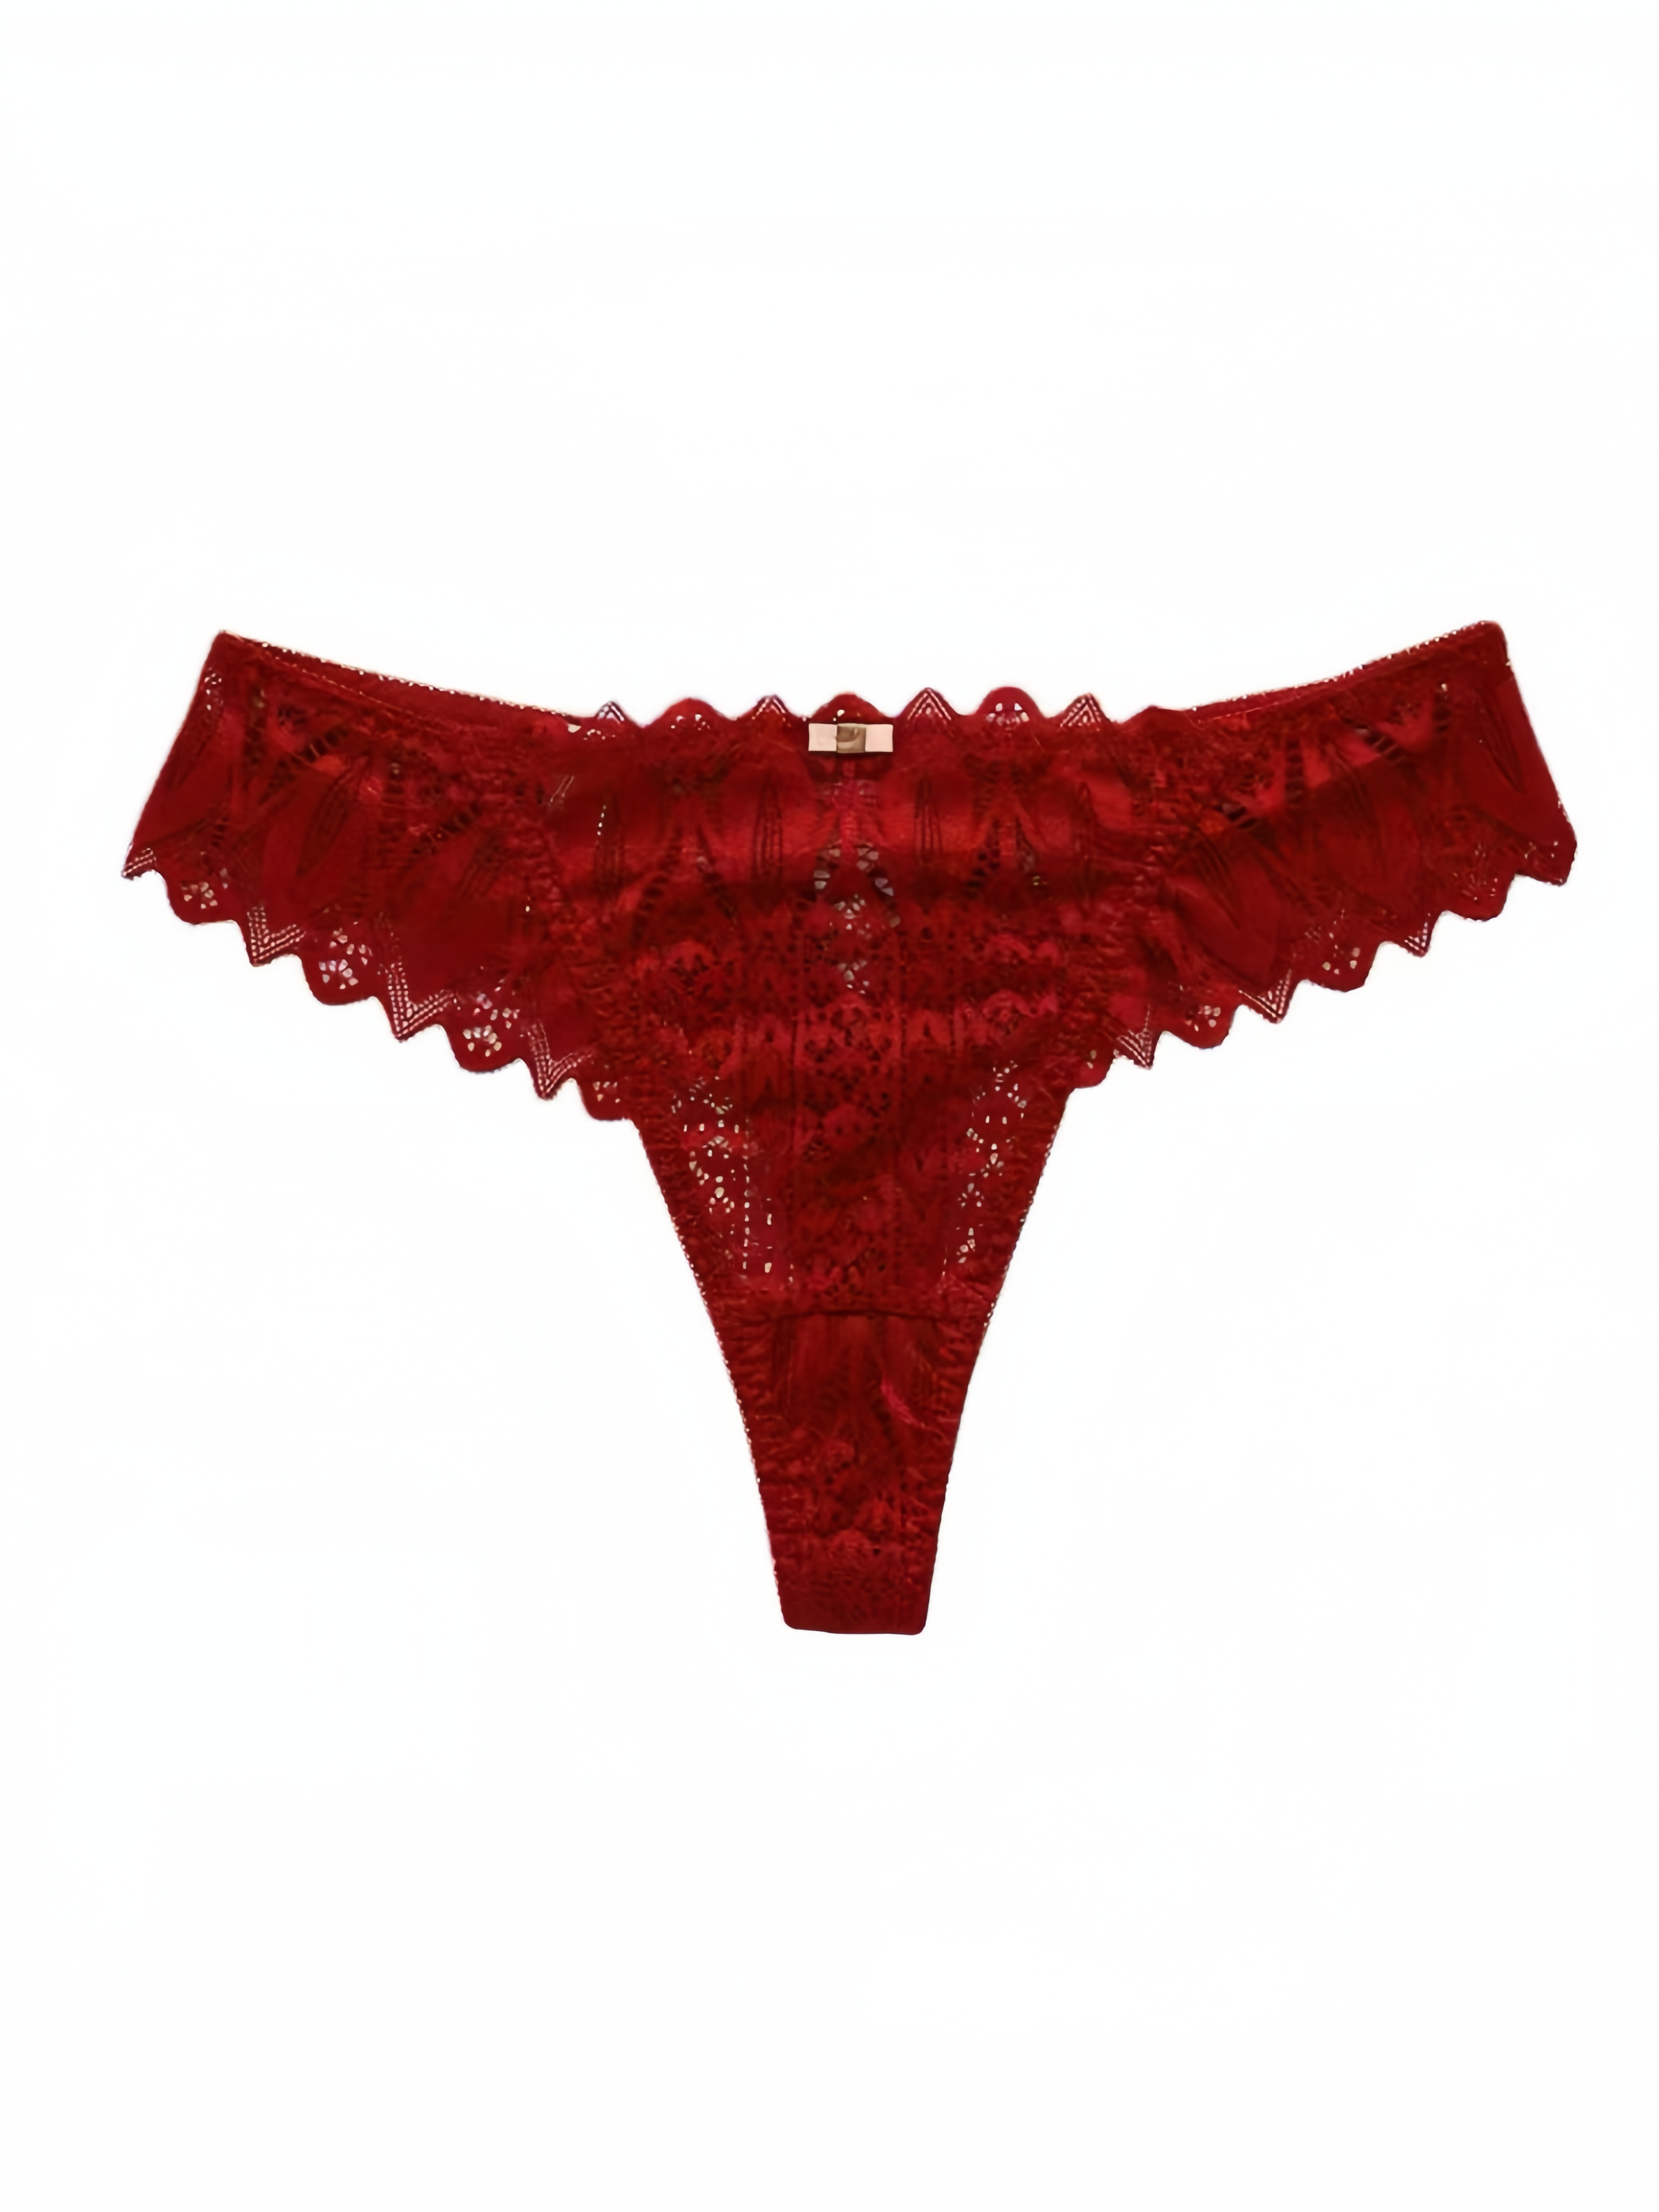 Sexy Floral Lace Thongs, Hollow Out Intimates Panties, Women's Lingerie & Underwear